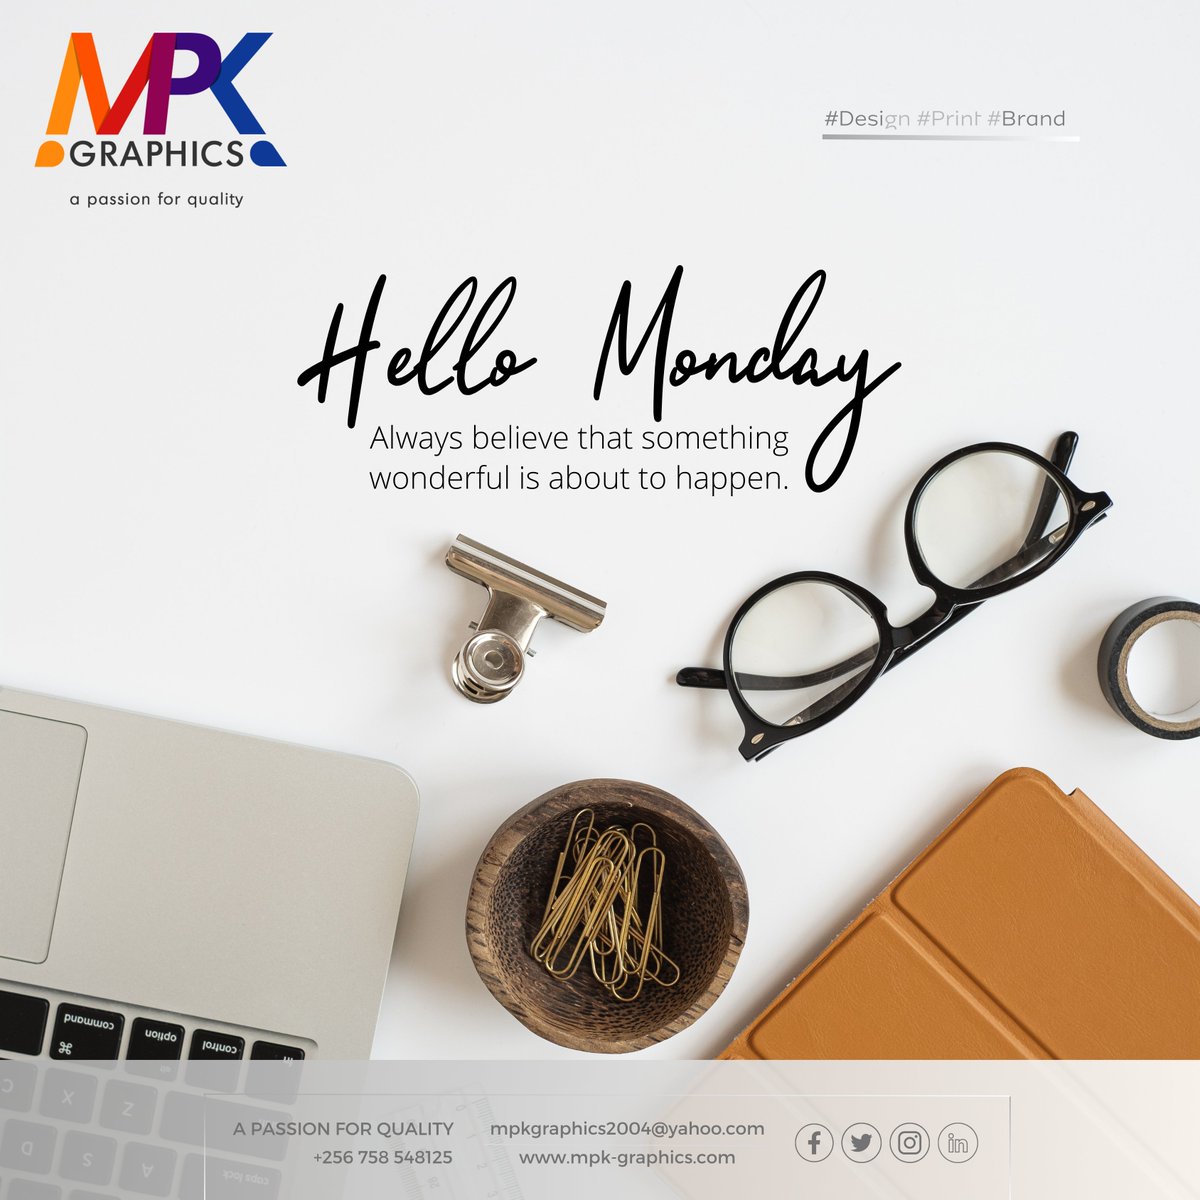 There are many opportunities every single day, and Monday is the perfect day to seize them all. ~ Isabella Koldras #MondayMotivation